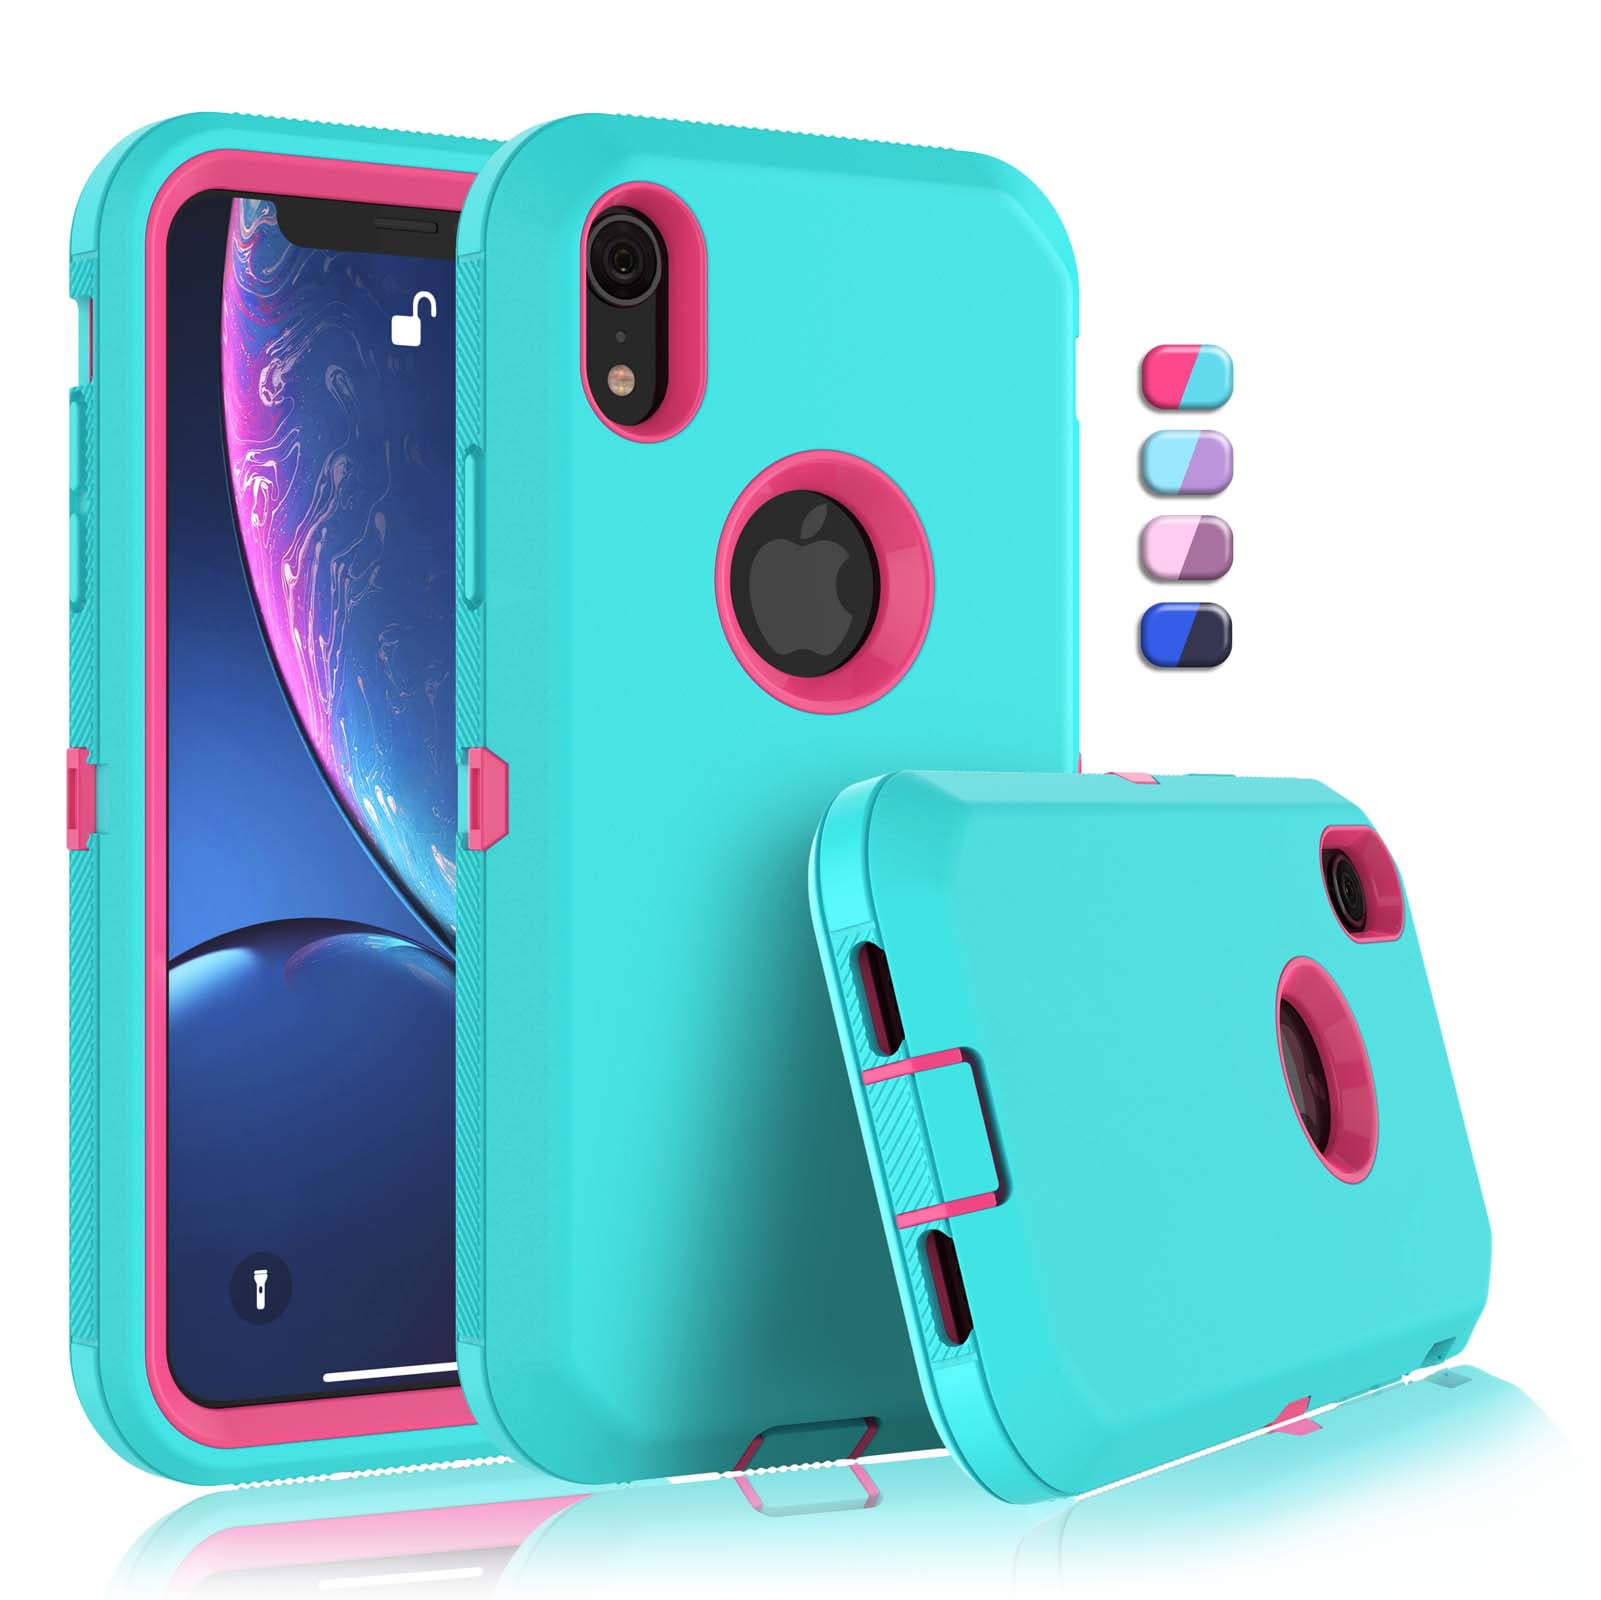 iPhone XR Cases Sturdy Phone Case for iPhone XR 6 1  Tekcoo Full Body  